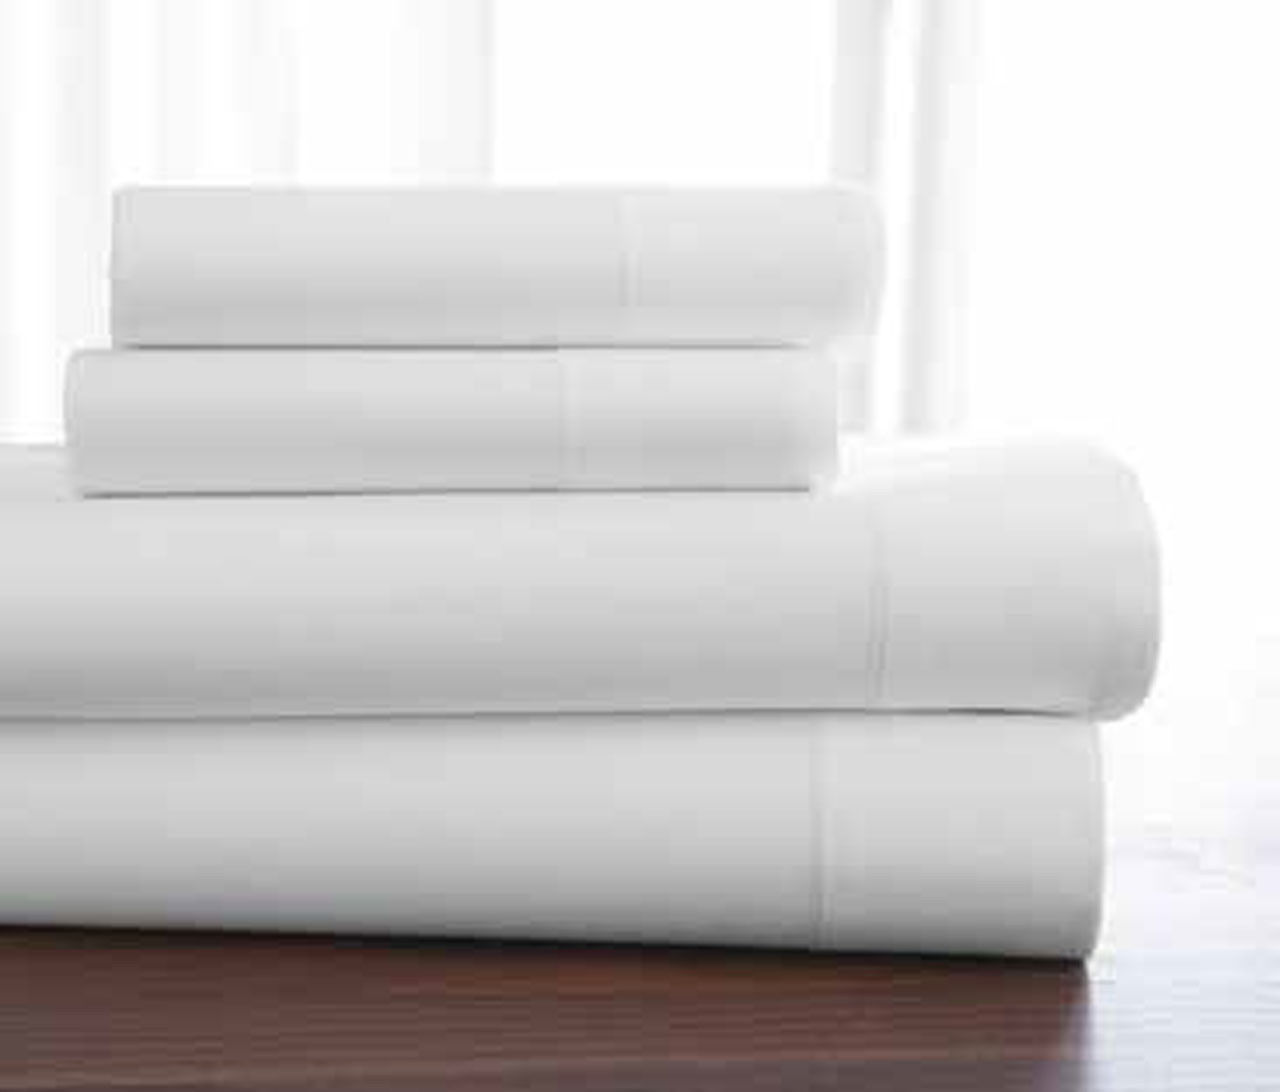 Are these Welspun T-400 hygrocotton sheets compromising comfort?